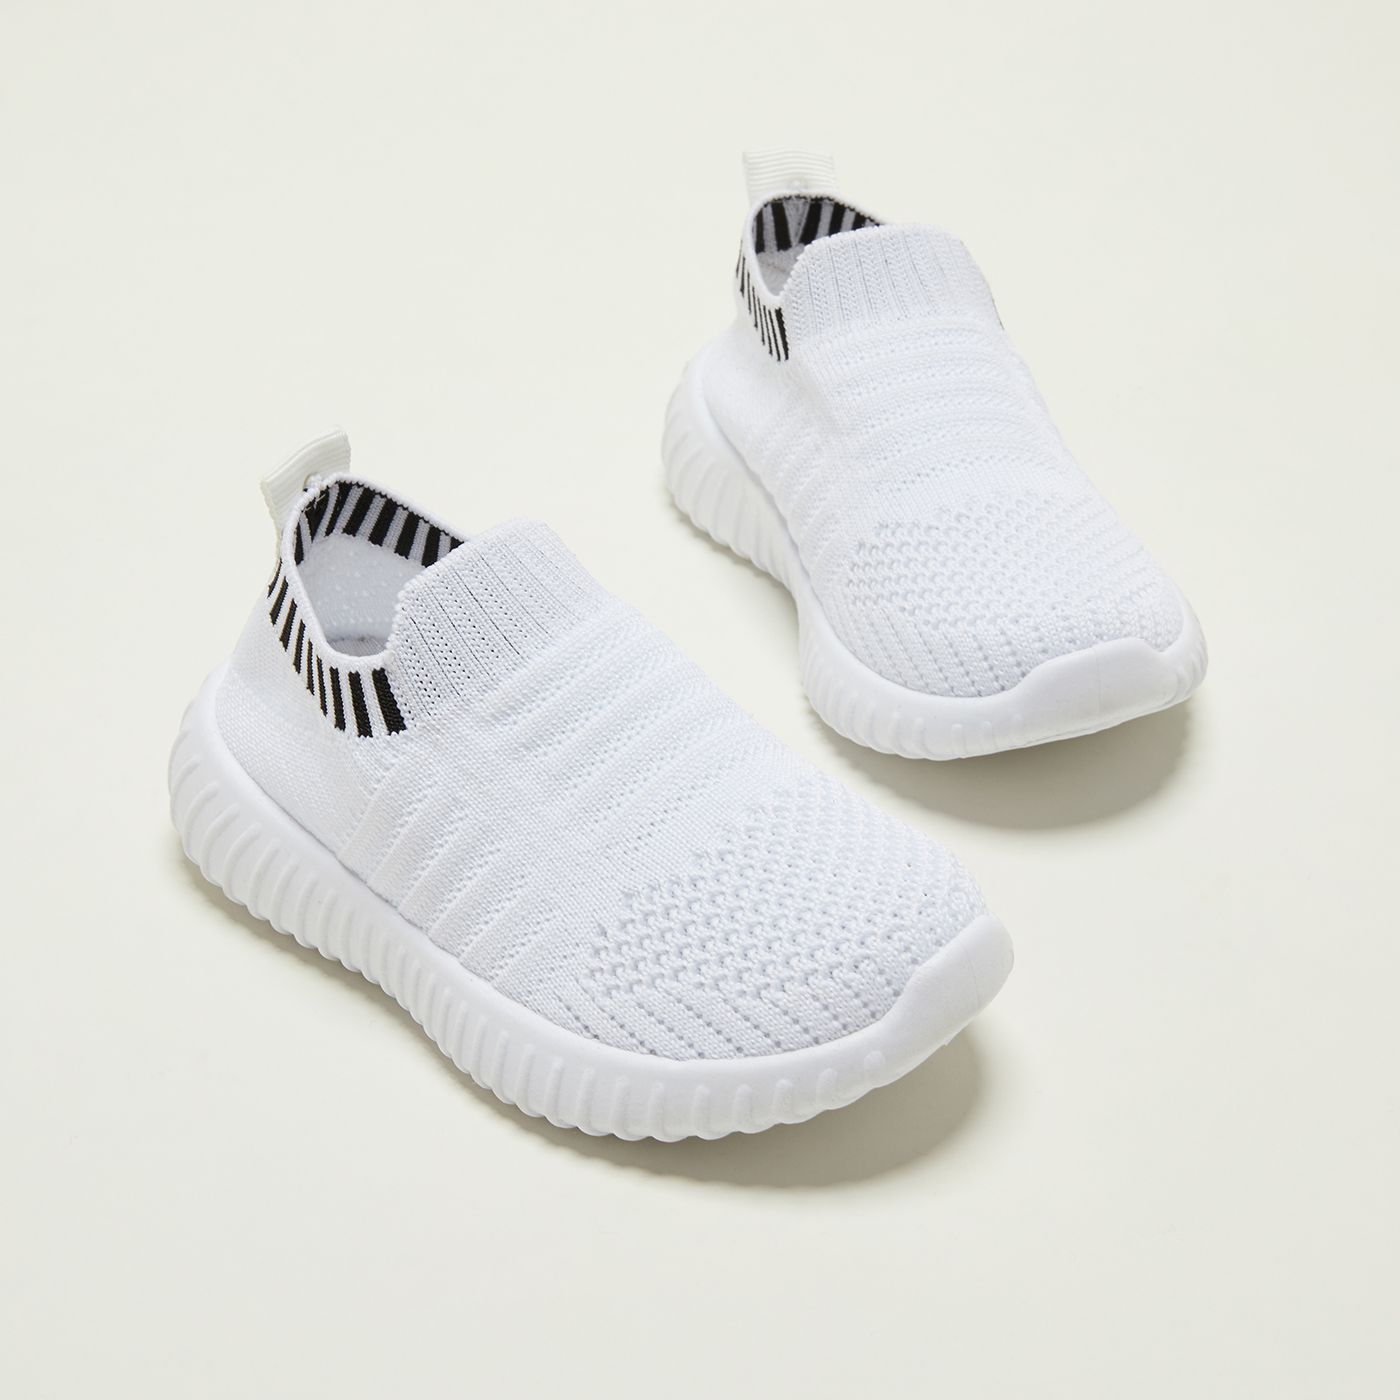 Toddler / Kid Knit Panel Slip-on Sports Shoes